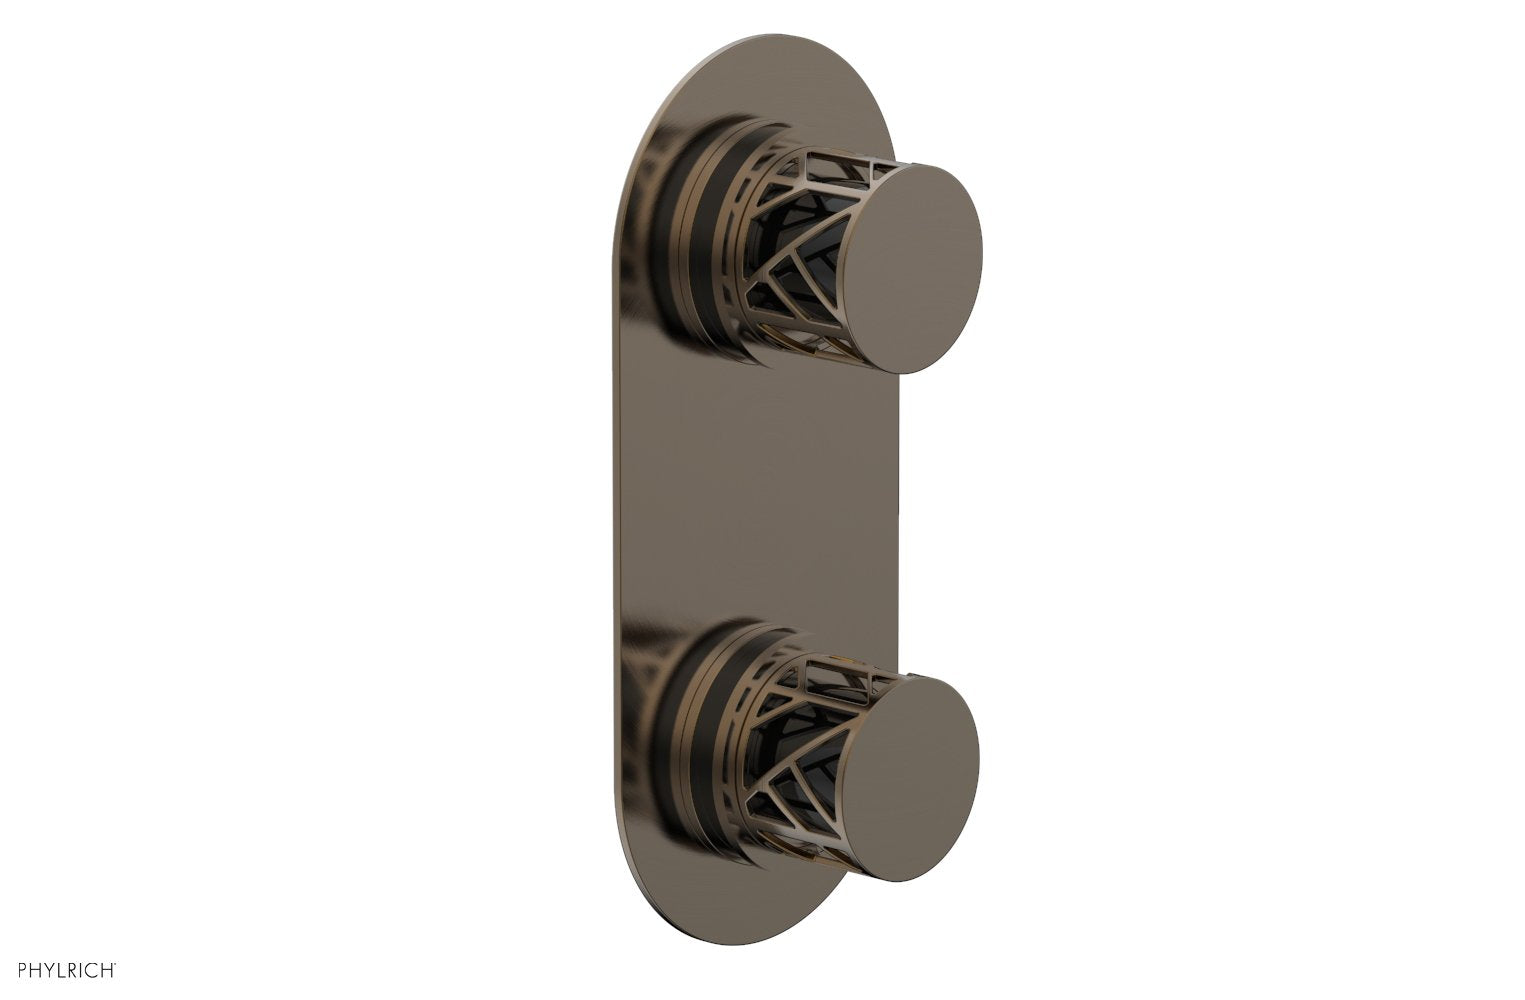 Phylrich JOLIE Thermostatic Valve with Volume Control or Diverter with "Black" Accents